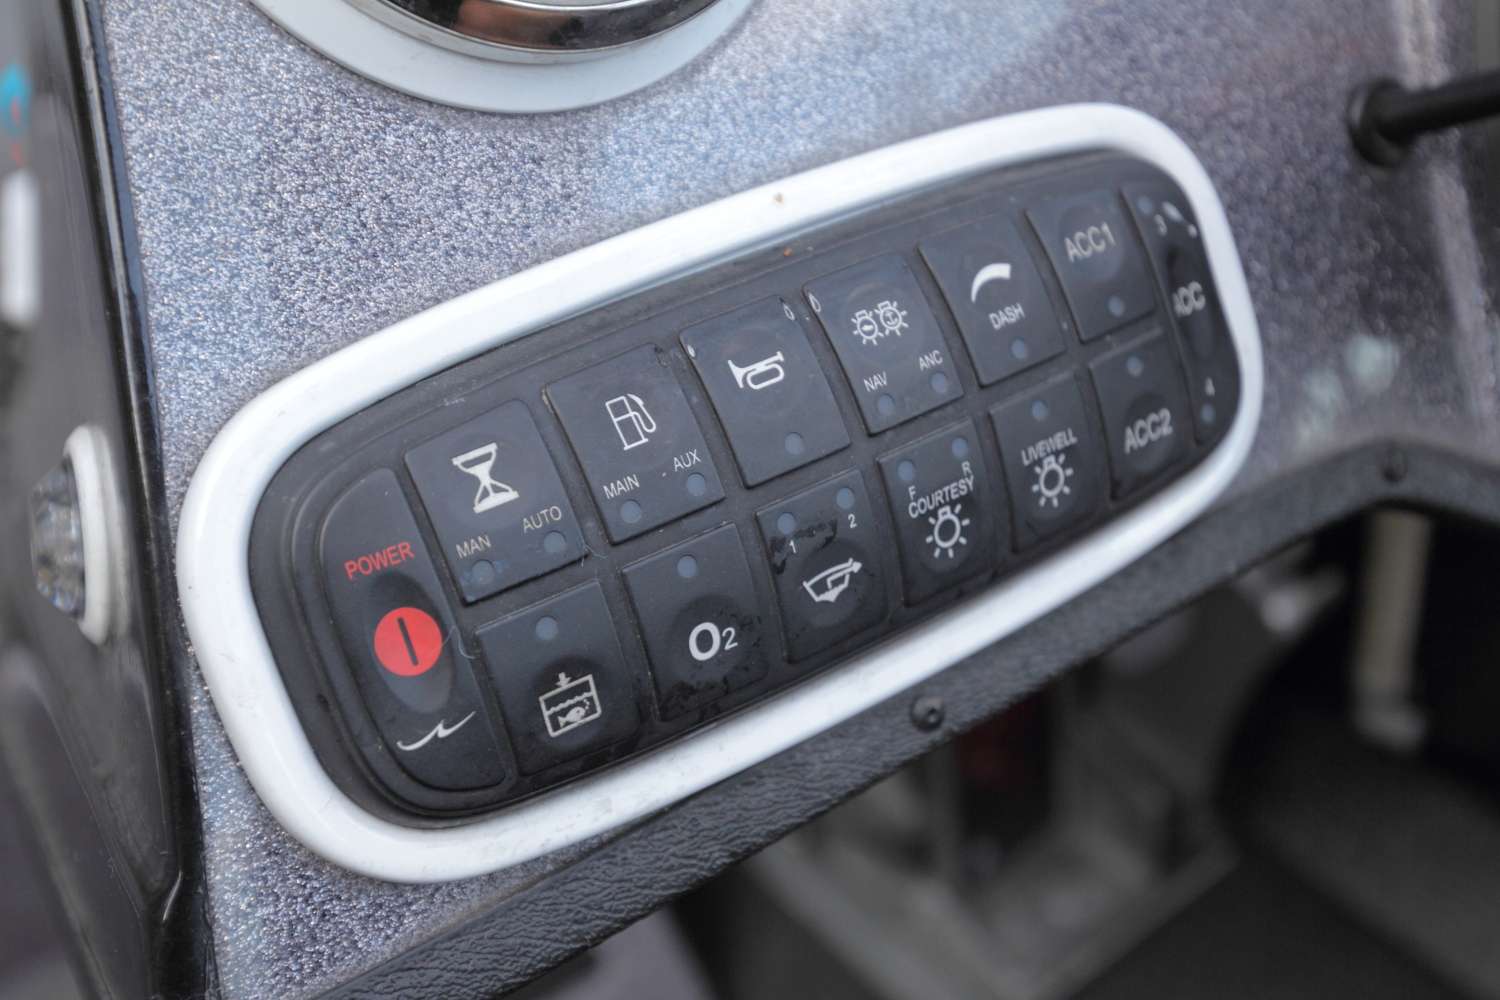 On the console, there's a keypad that controls all of the livewells, interior lights, Oxygenator, etc. The driver can set recirculation or auto with just the touch of a finger. 